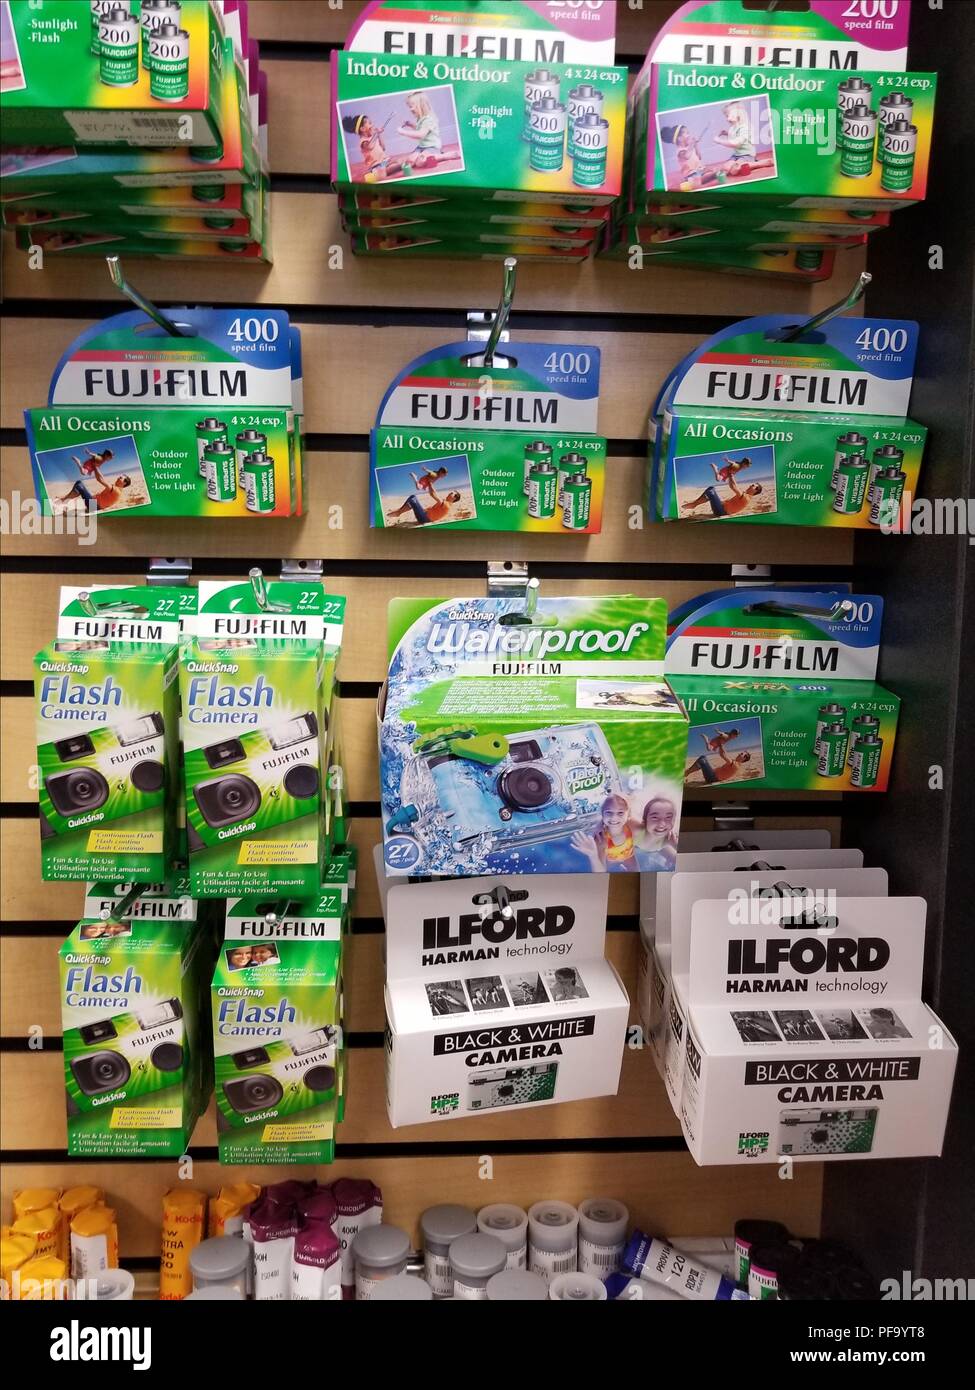 Disposable analog film cameras, including black and white film cameras from film manufacturer Ilford, are on display at Mike's Camera in Dublin, California, July 6, 2018. () Stock Photo